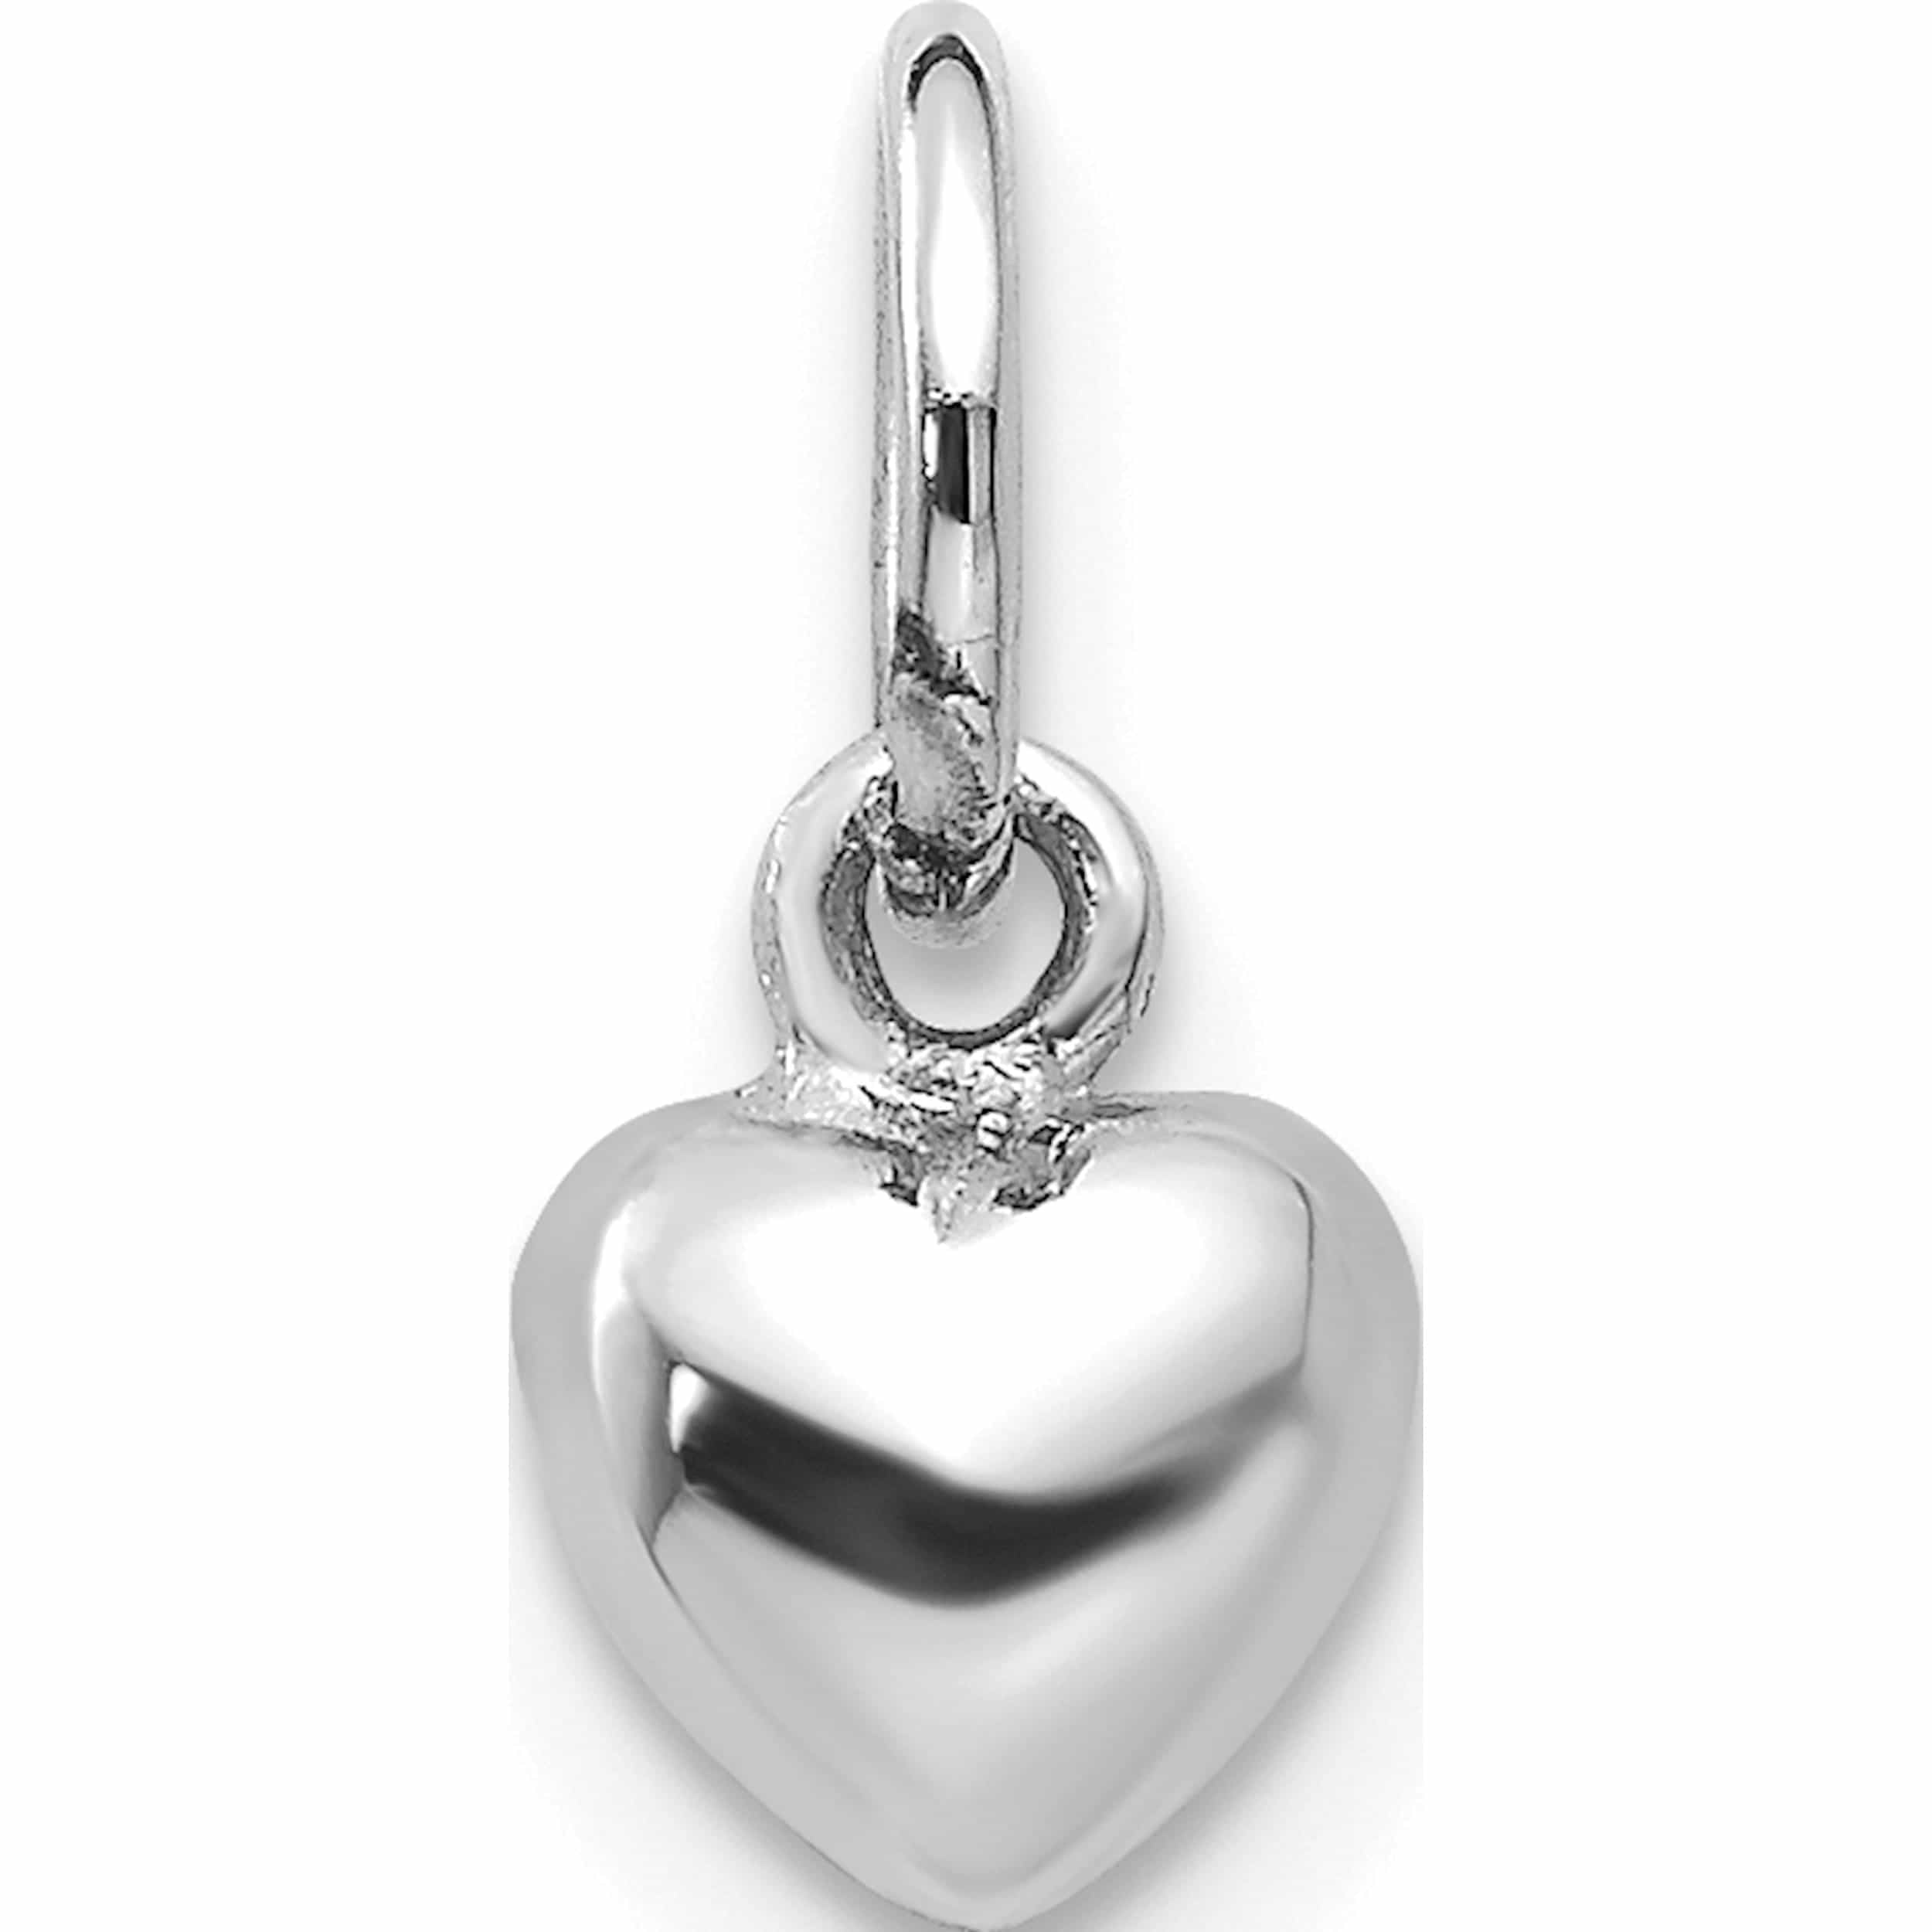 14k Gold Solid Polished Plain Puffed Heart Charm New Pendant Yellow Gold